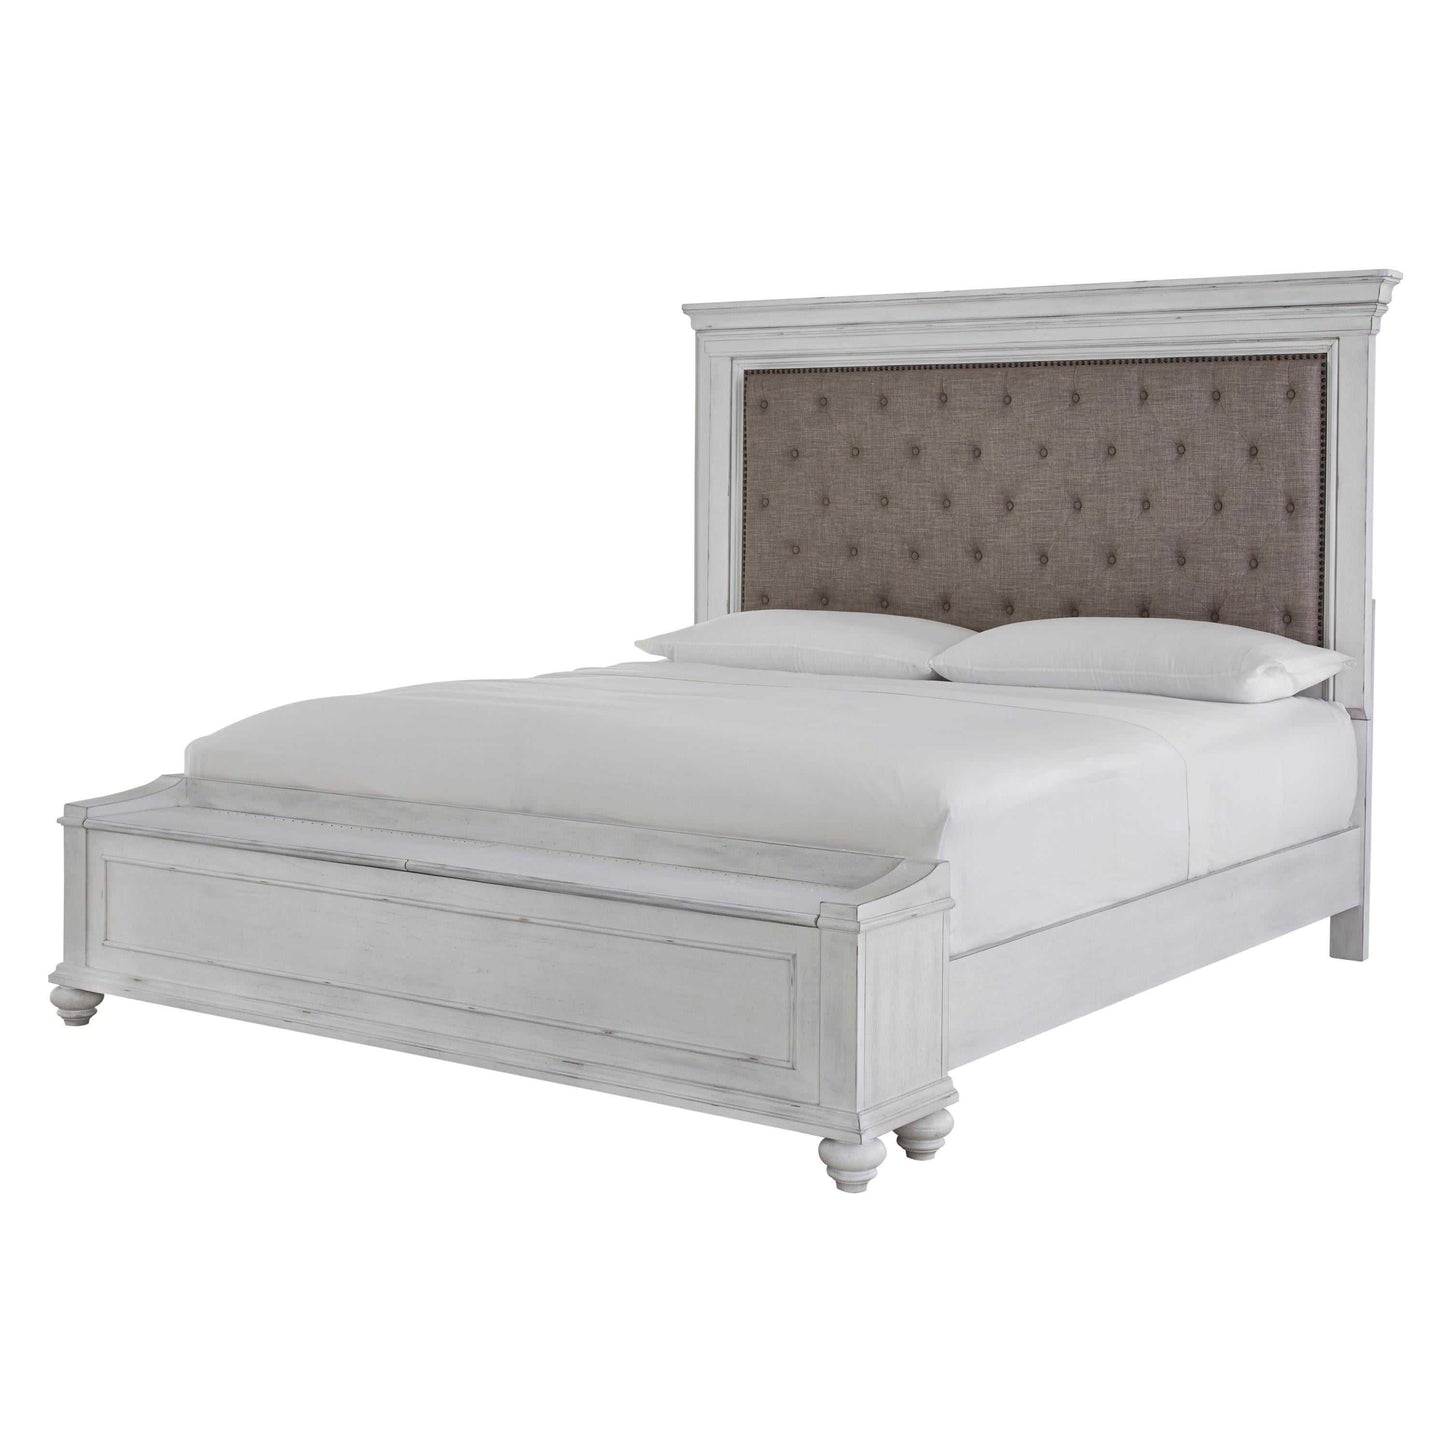 Benchcraft Kanwyn King Upholstered Panel Bed with Storage B777-158/B777-56S/B777-97